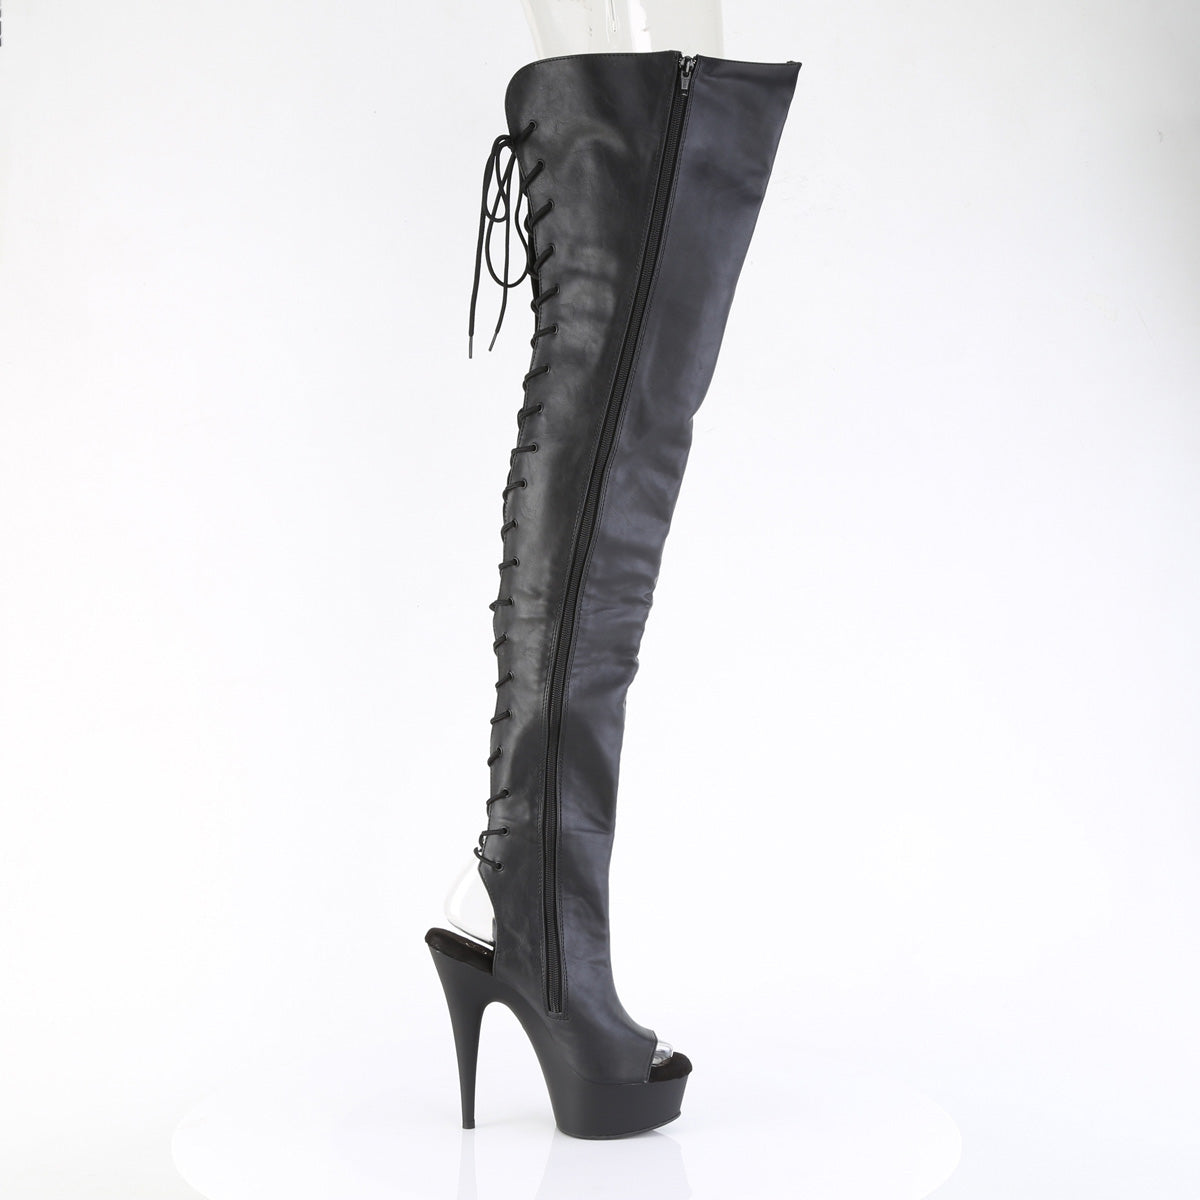 DELIGHT-4019 Back Lace Crotch Boot